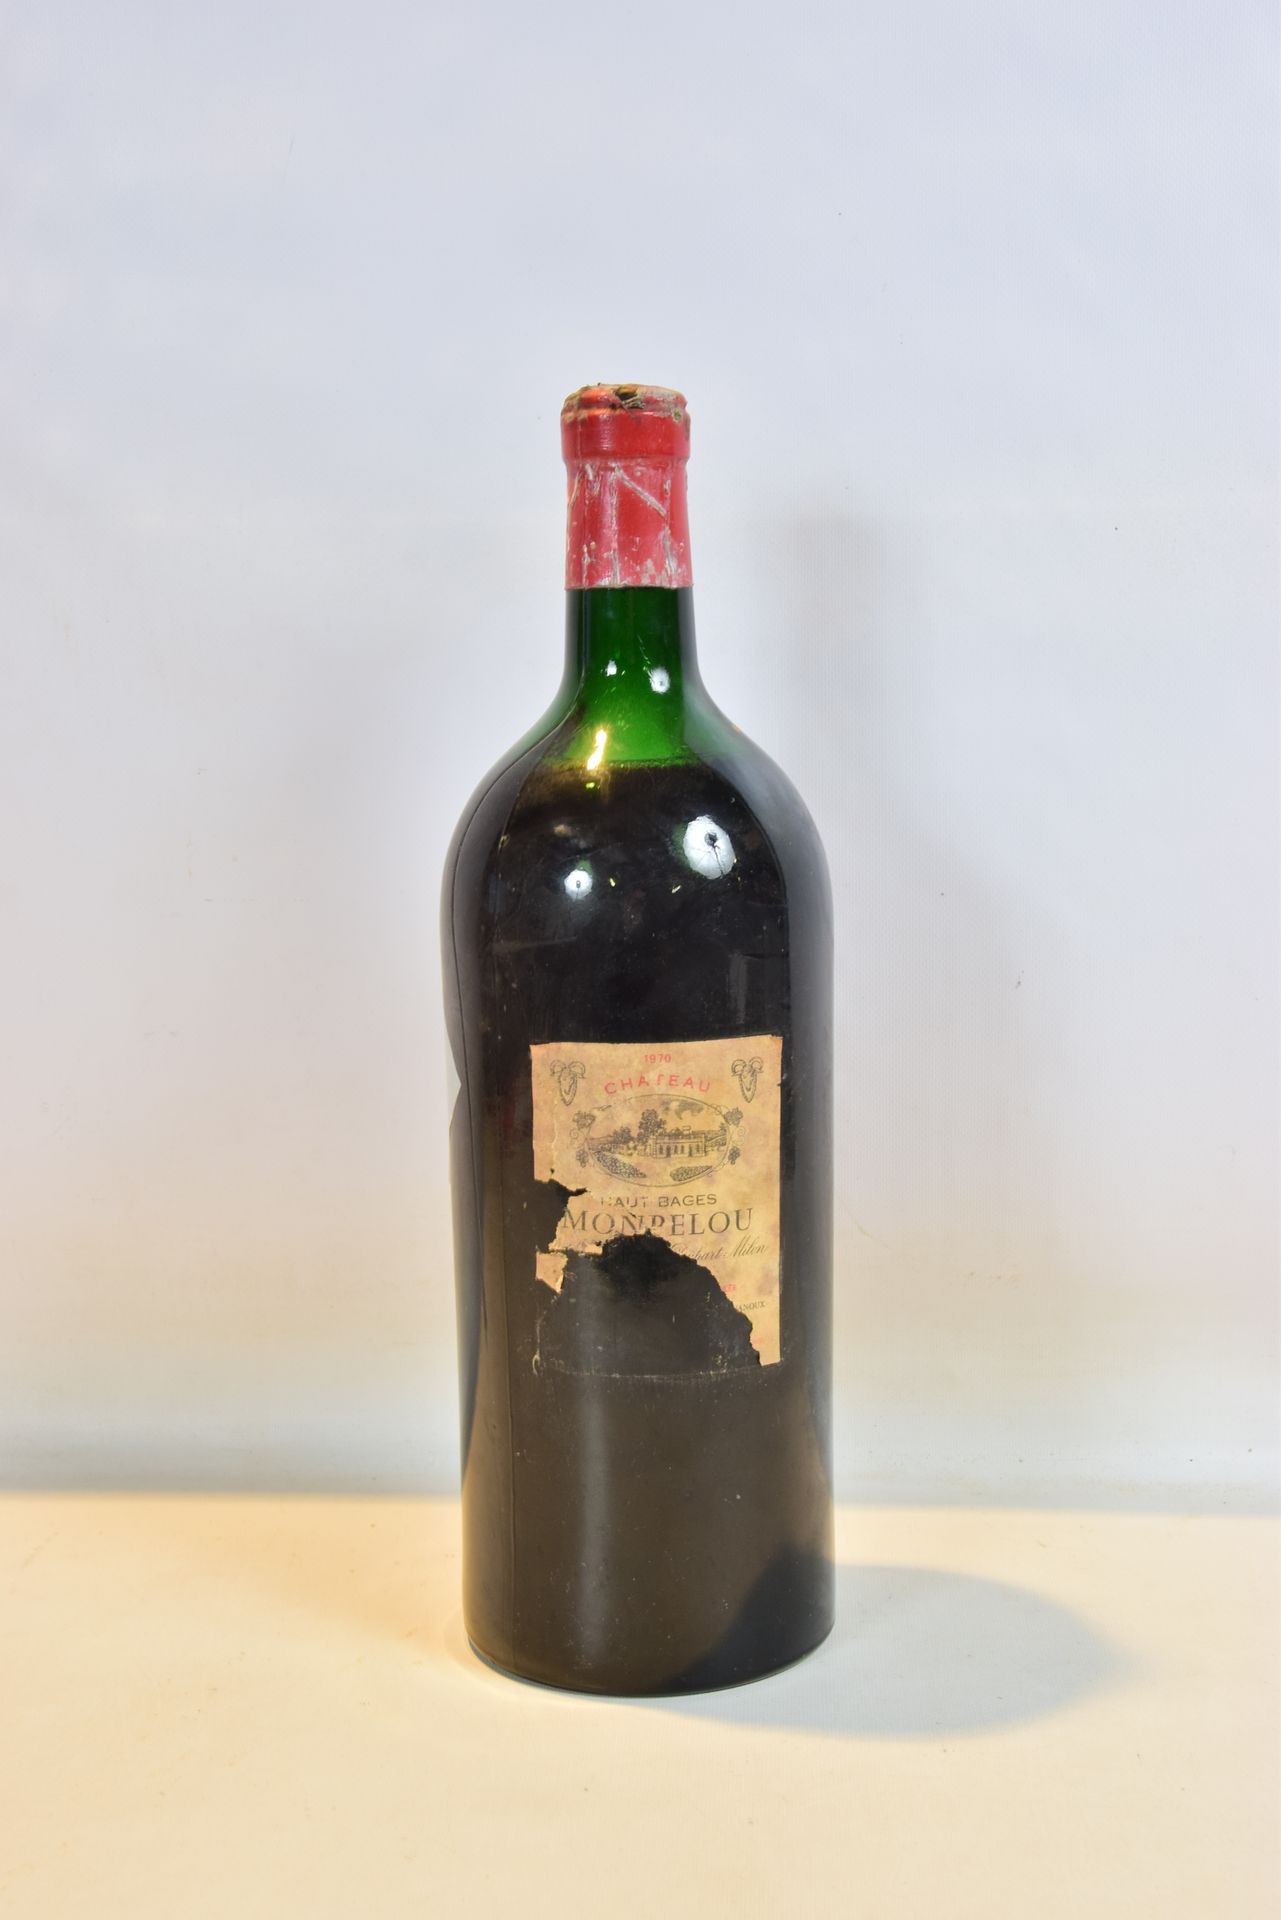 Null 1 Jéro CH. HAUT BAGES MONPELOU Pauillac 1970

(5 L) And. Very stained and t&hellip;